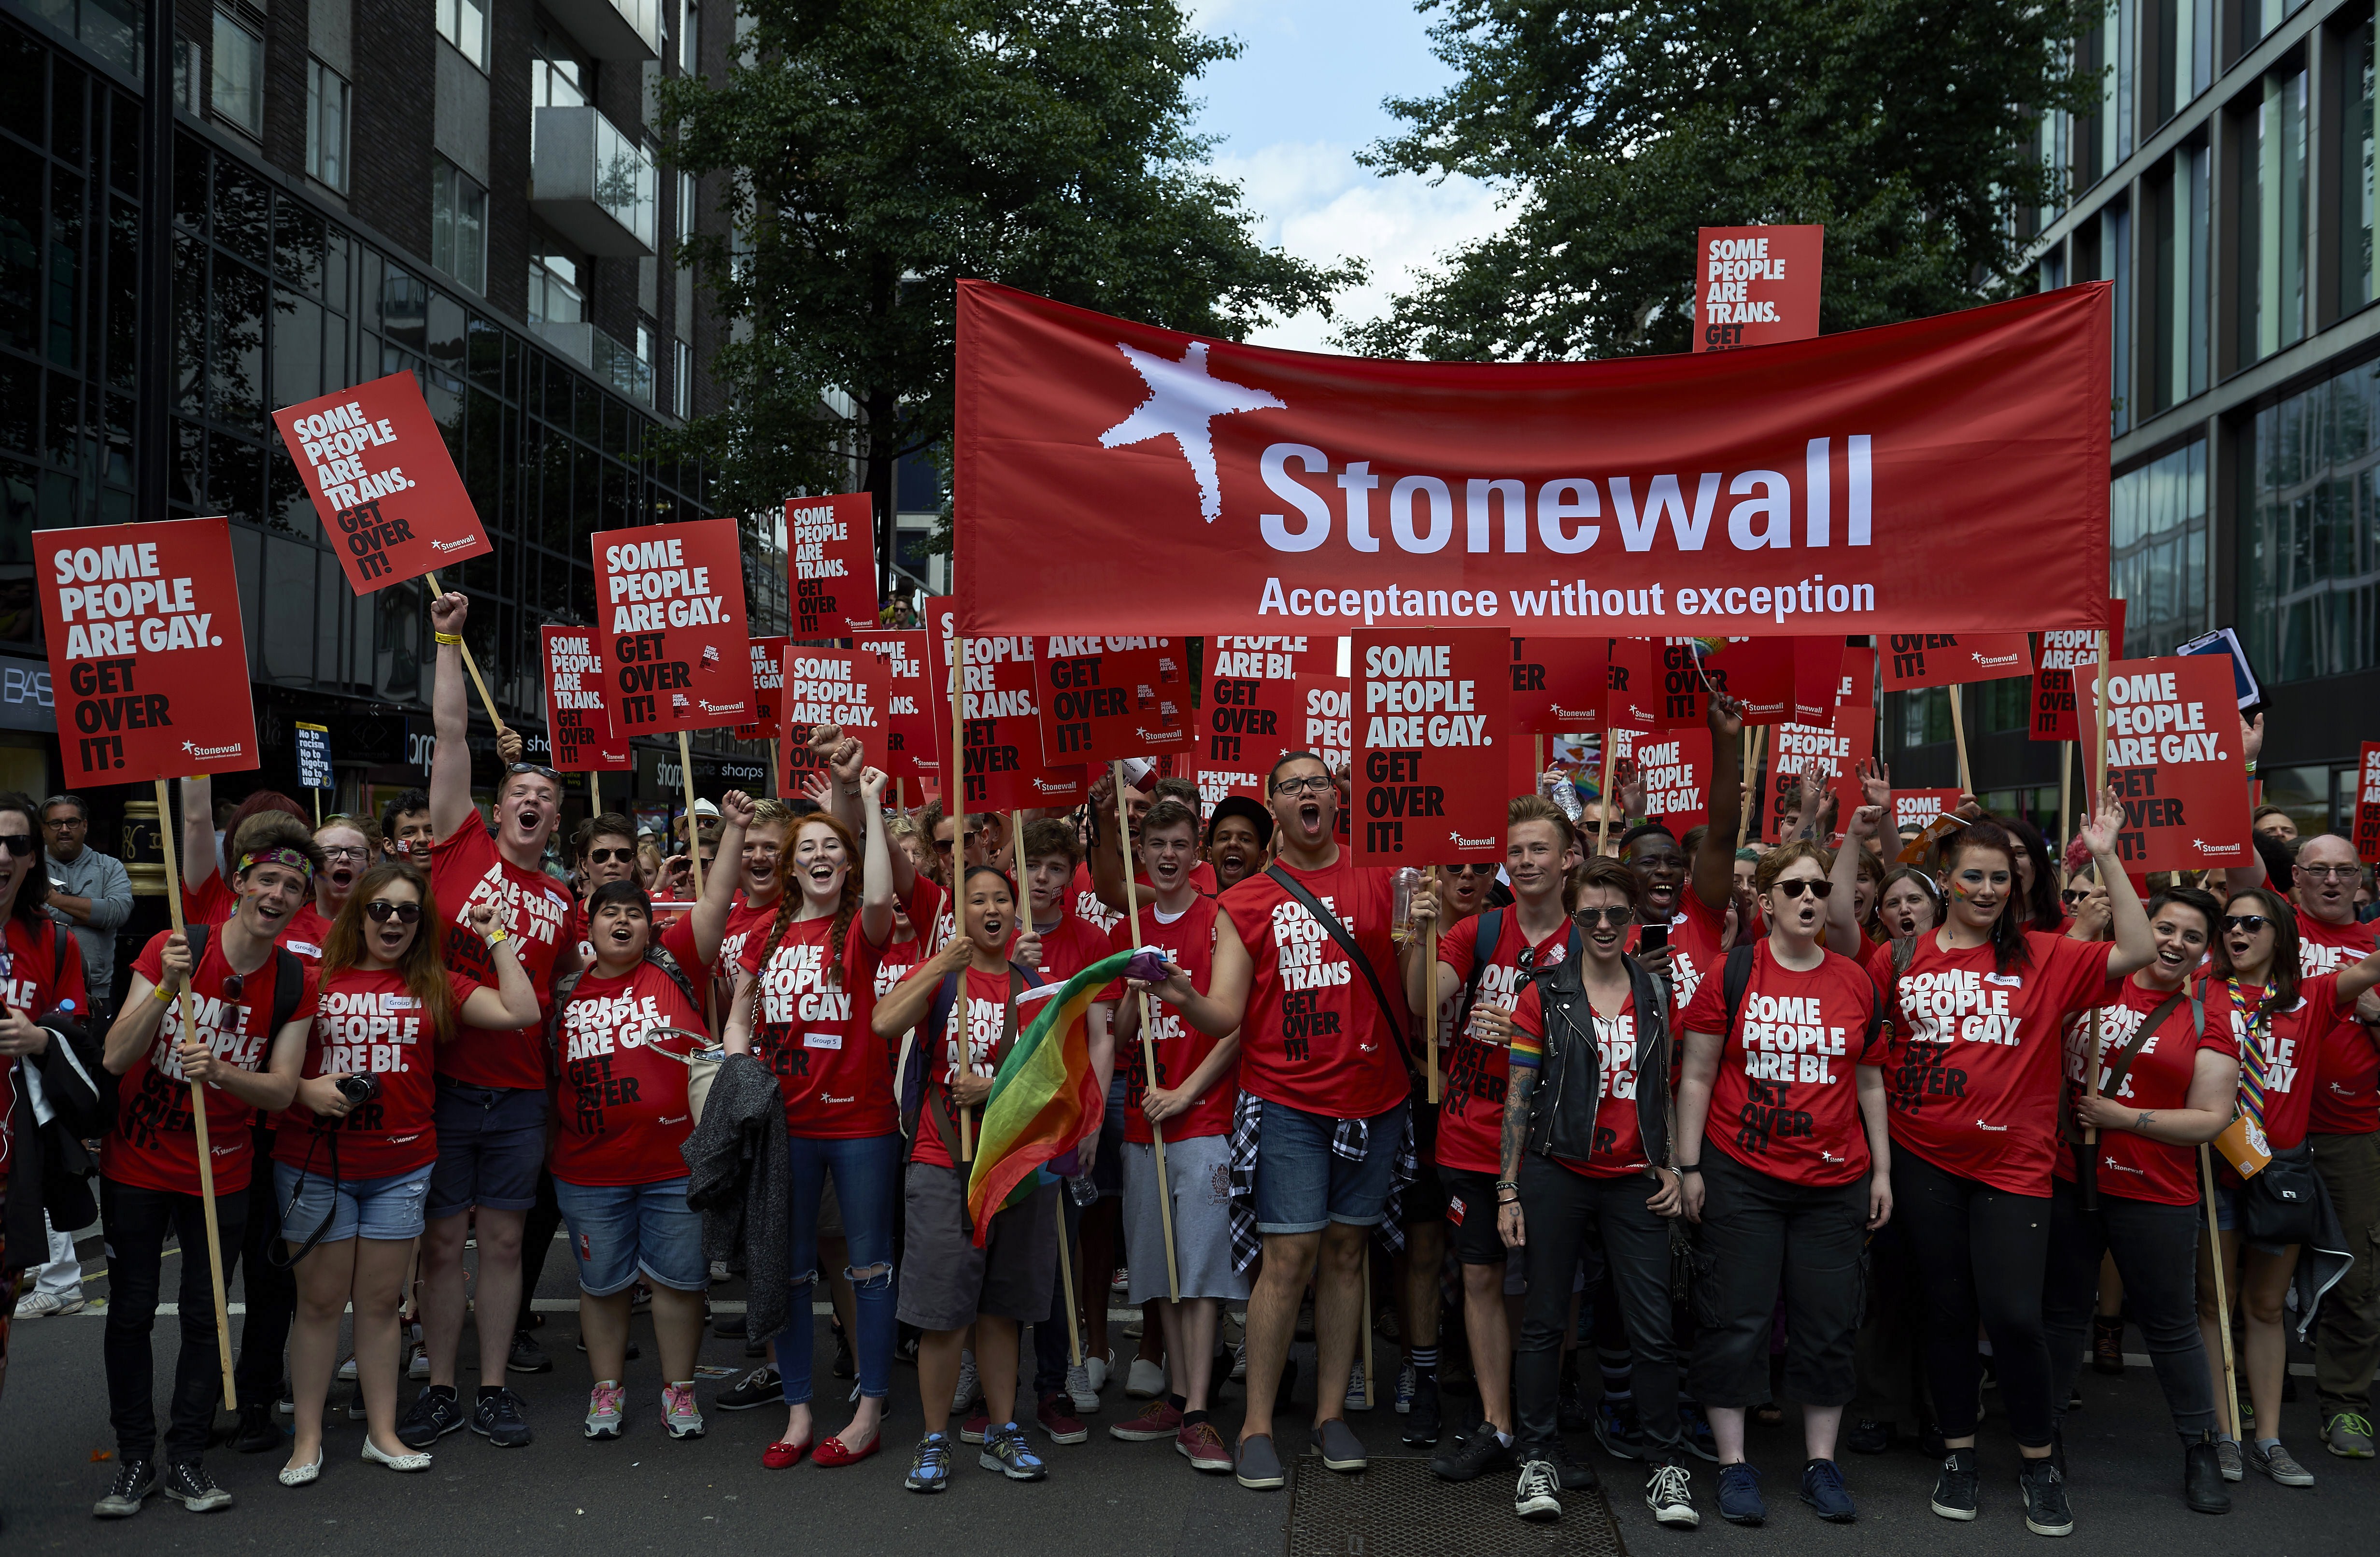 Stonewall members have been backing trans rights as part of LGBT rights.